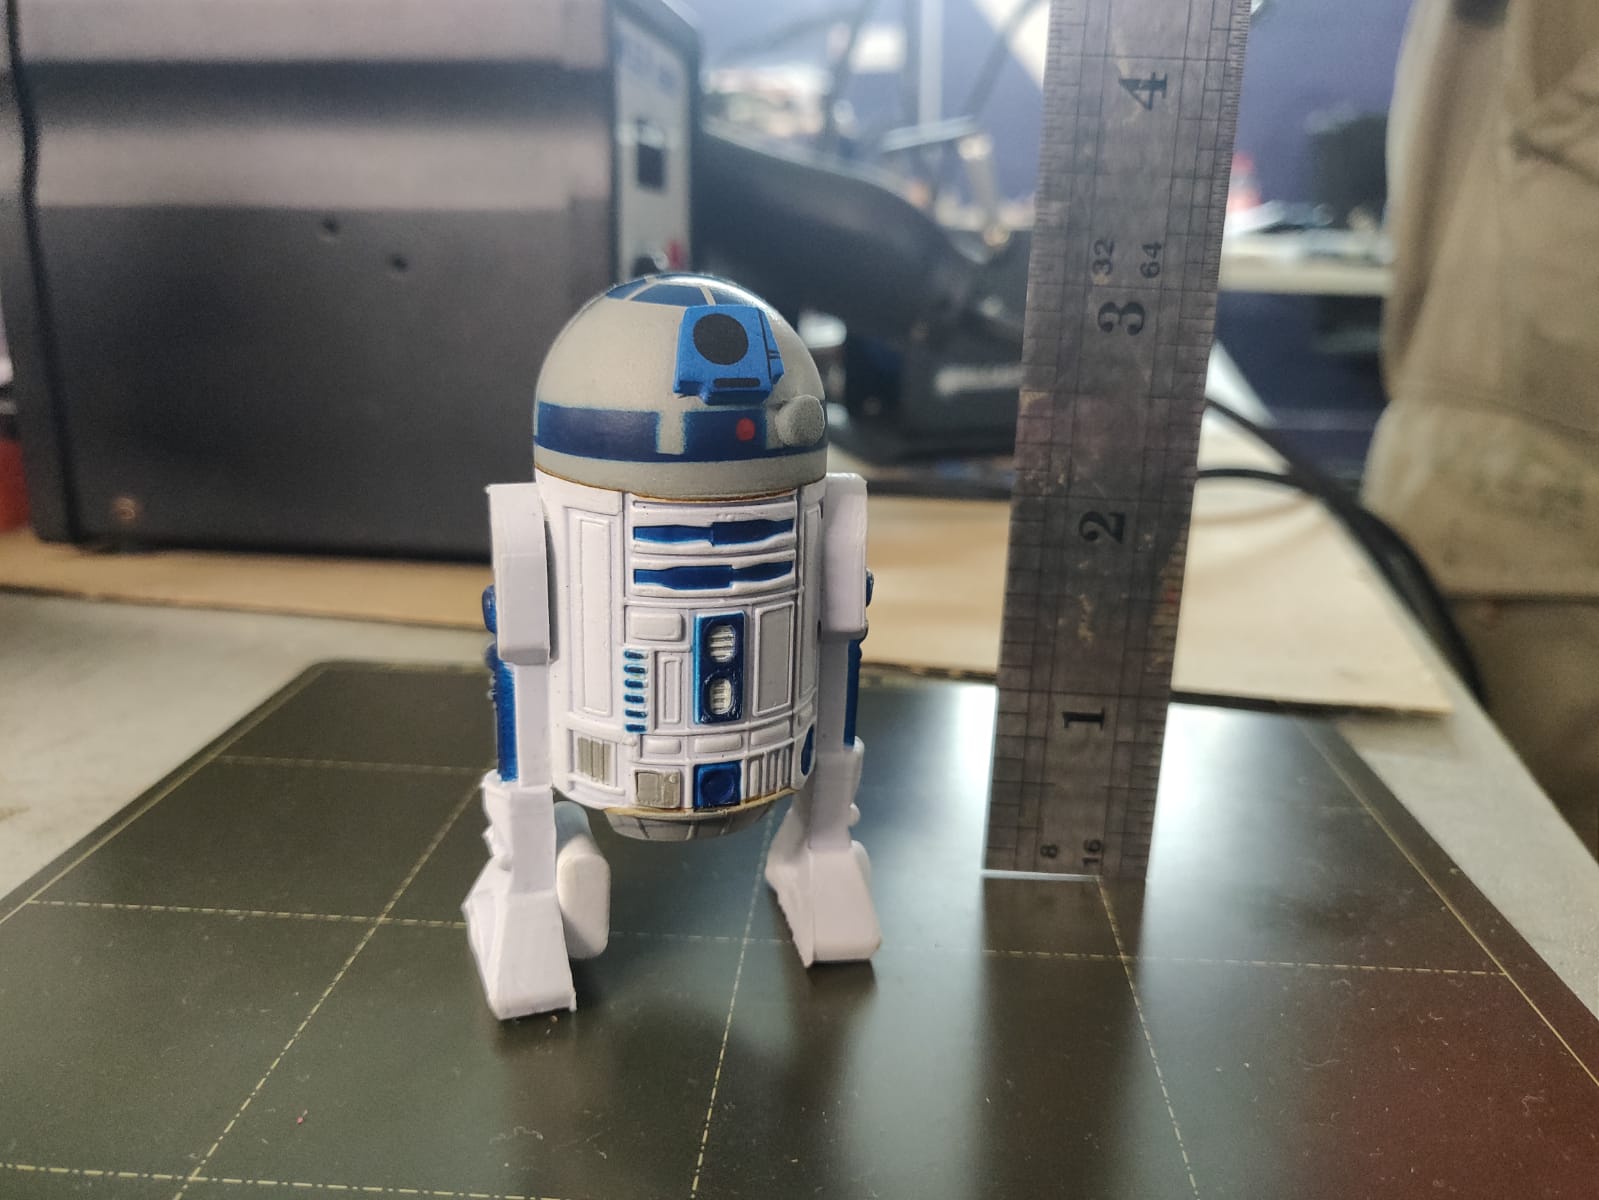 R2D2 to scan